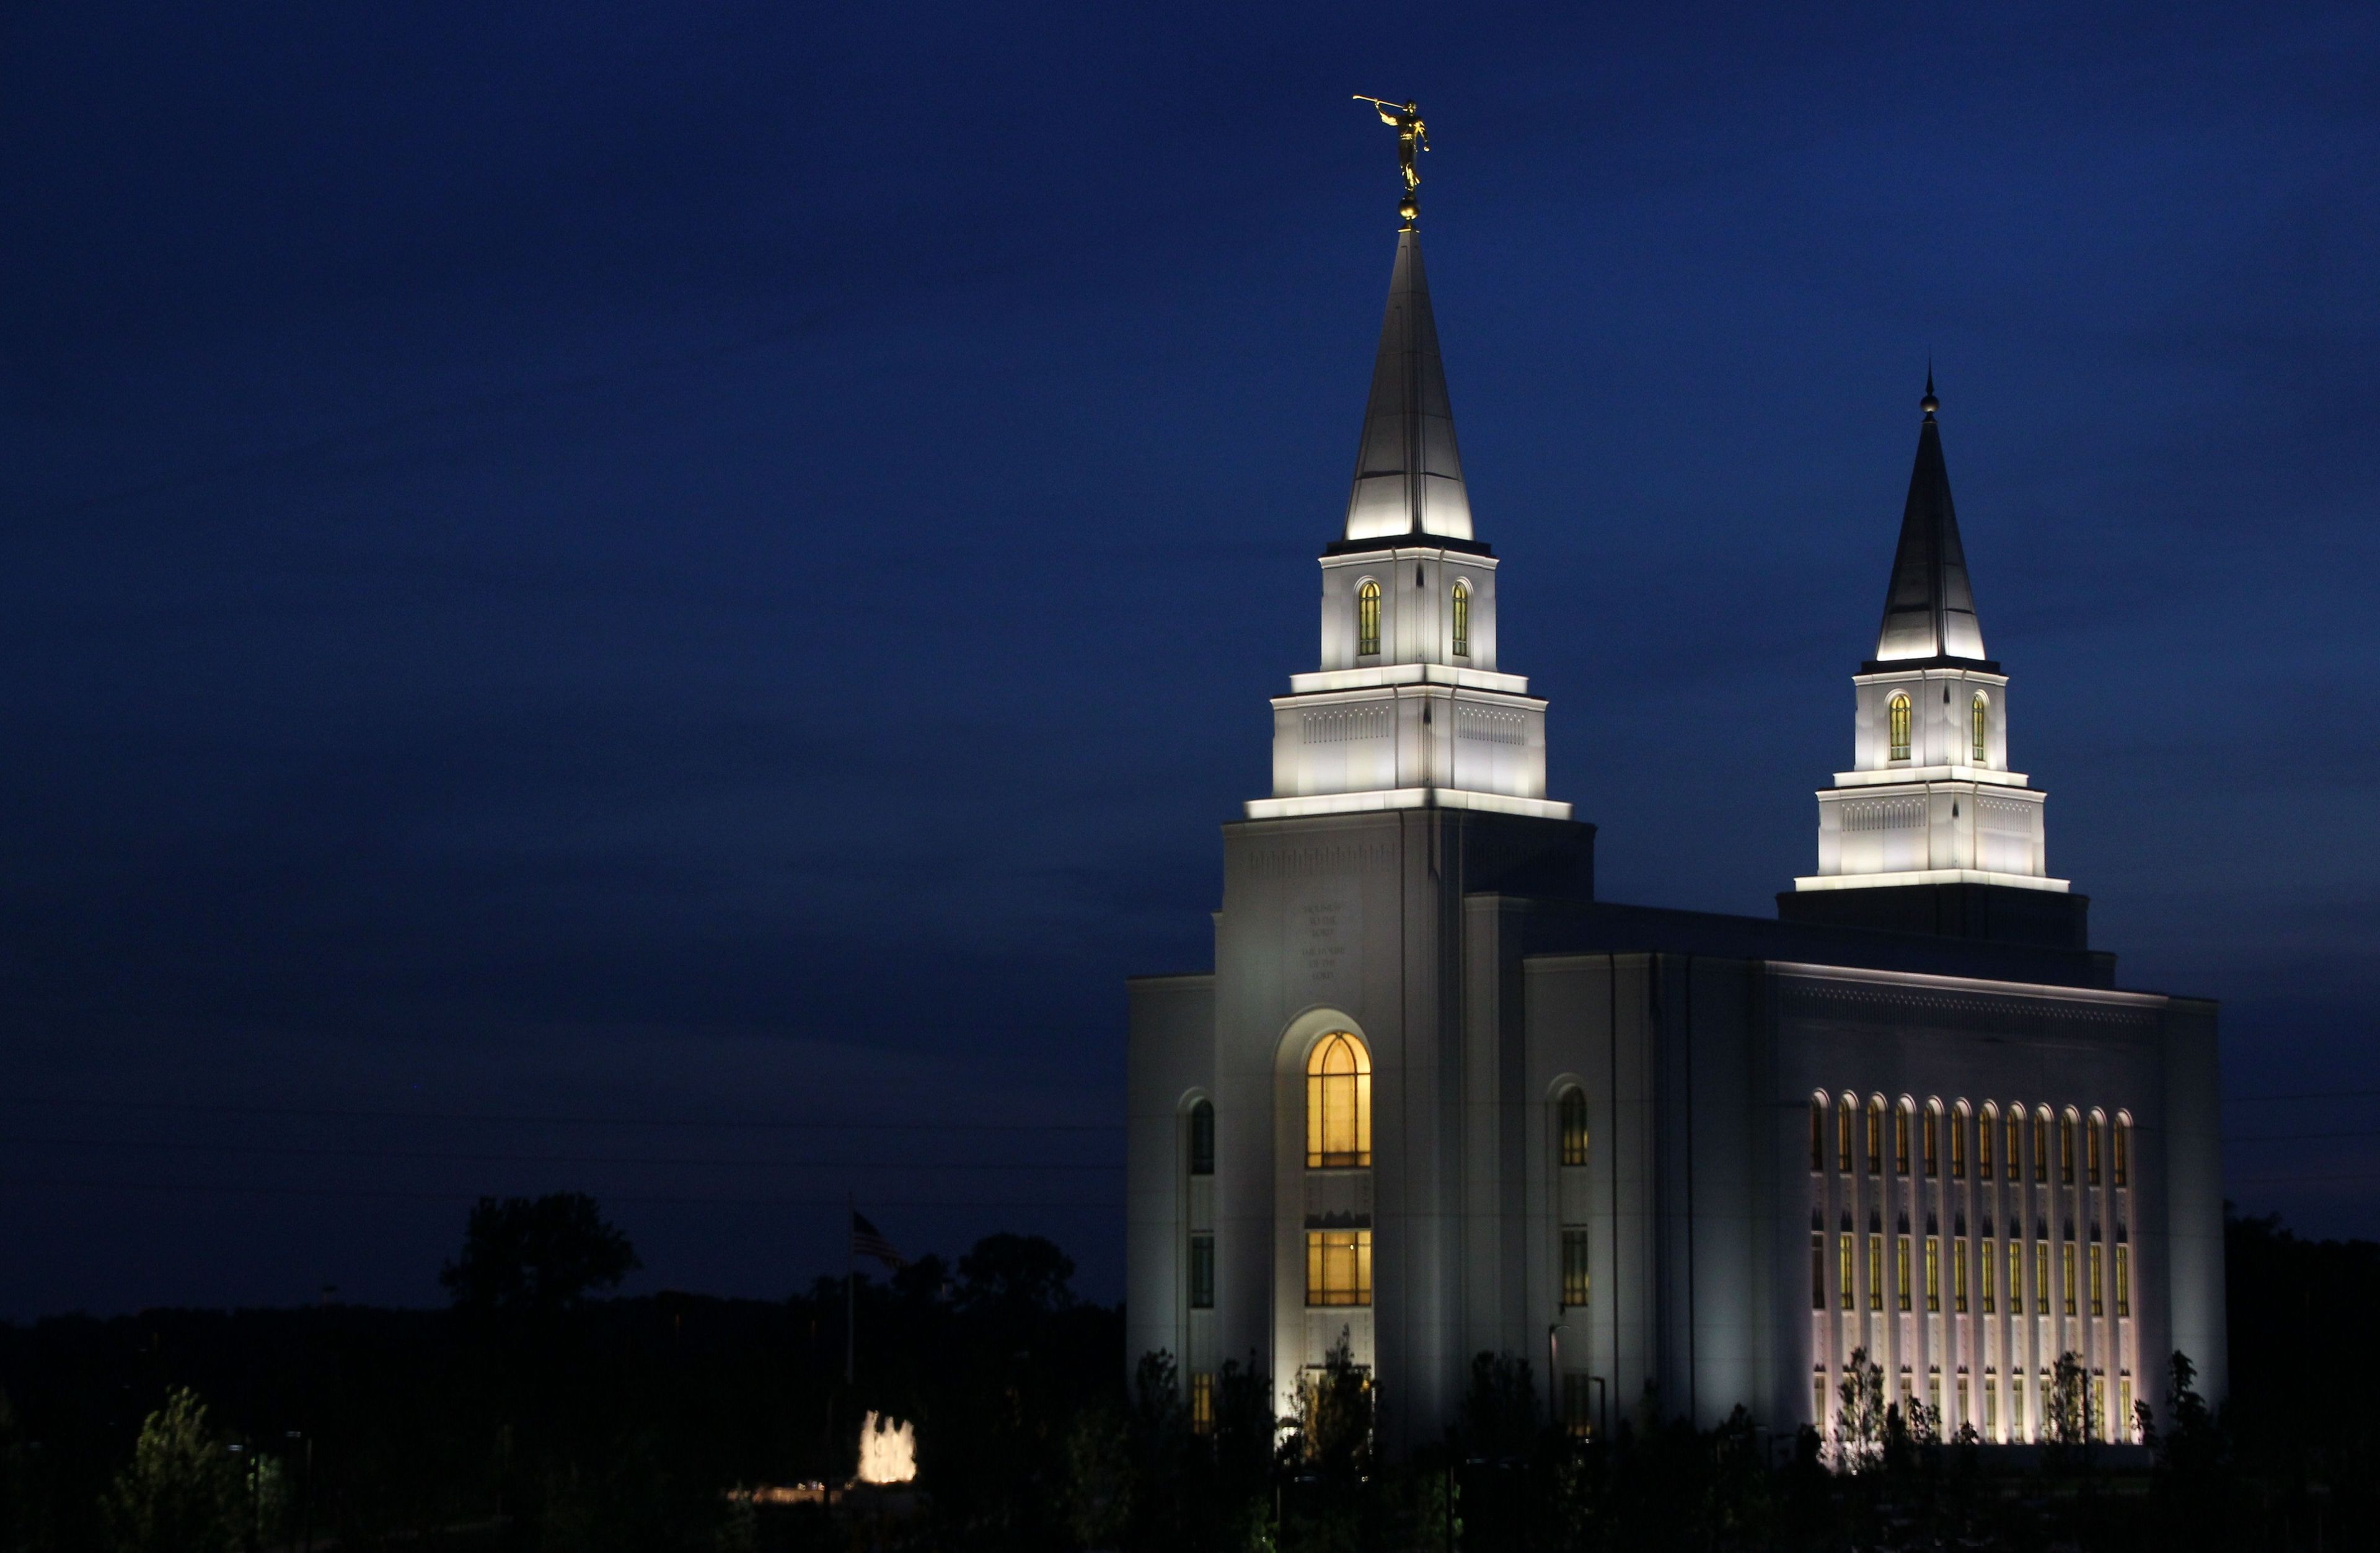 The Kansas City Missouri Temple lit up in the evening, including scenery.